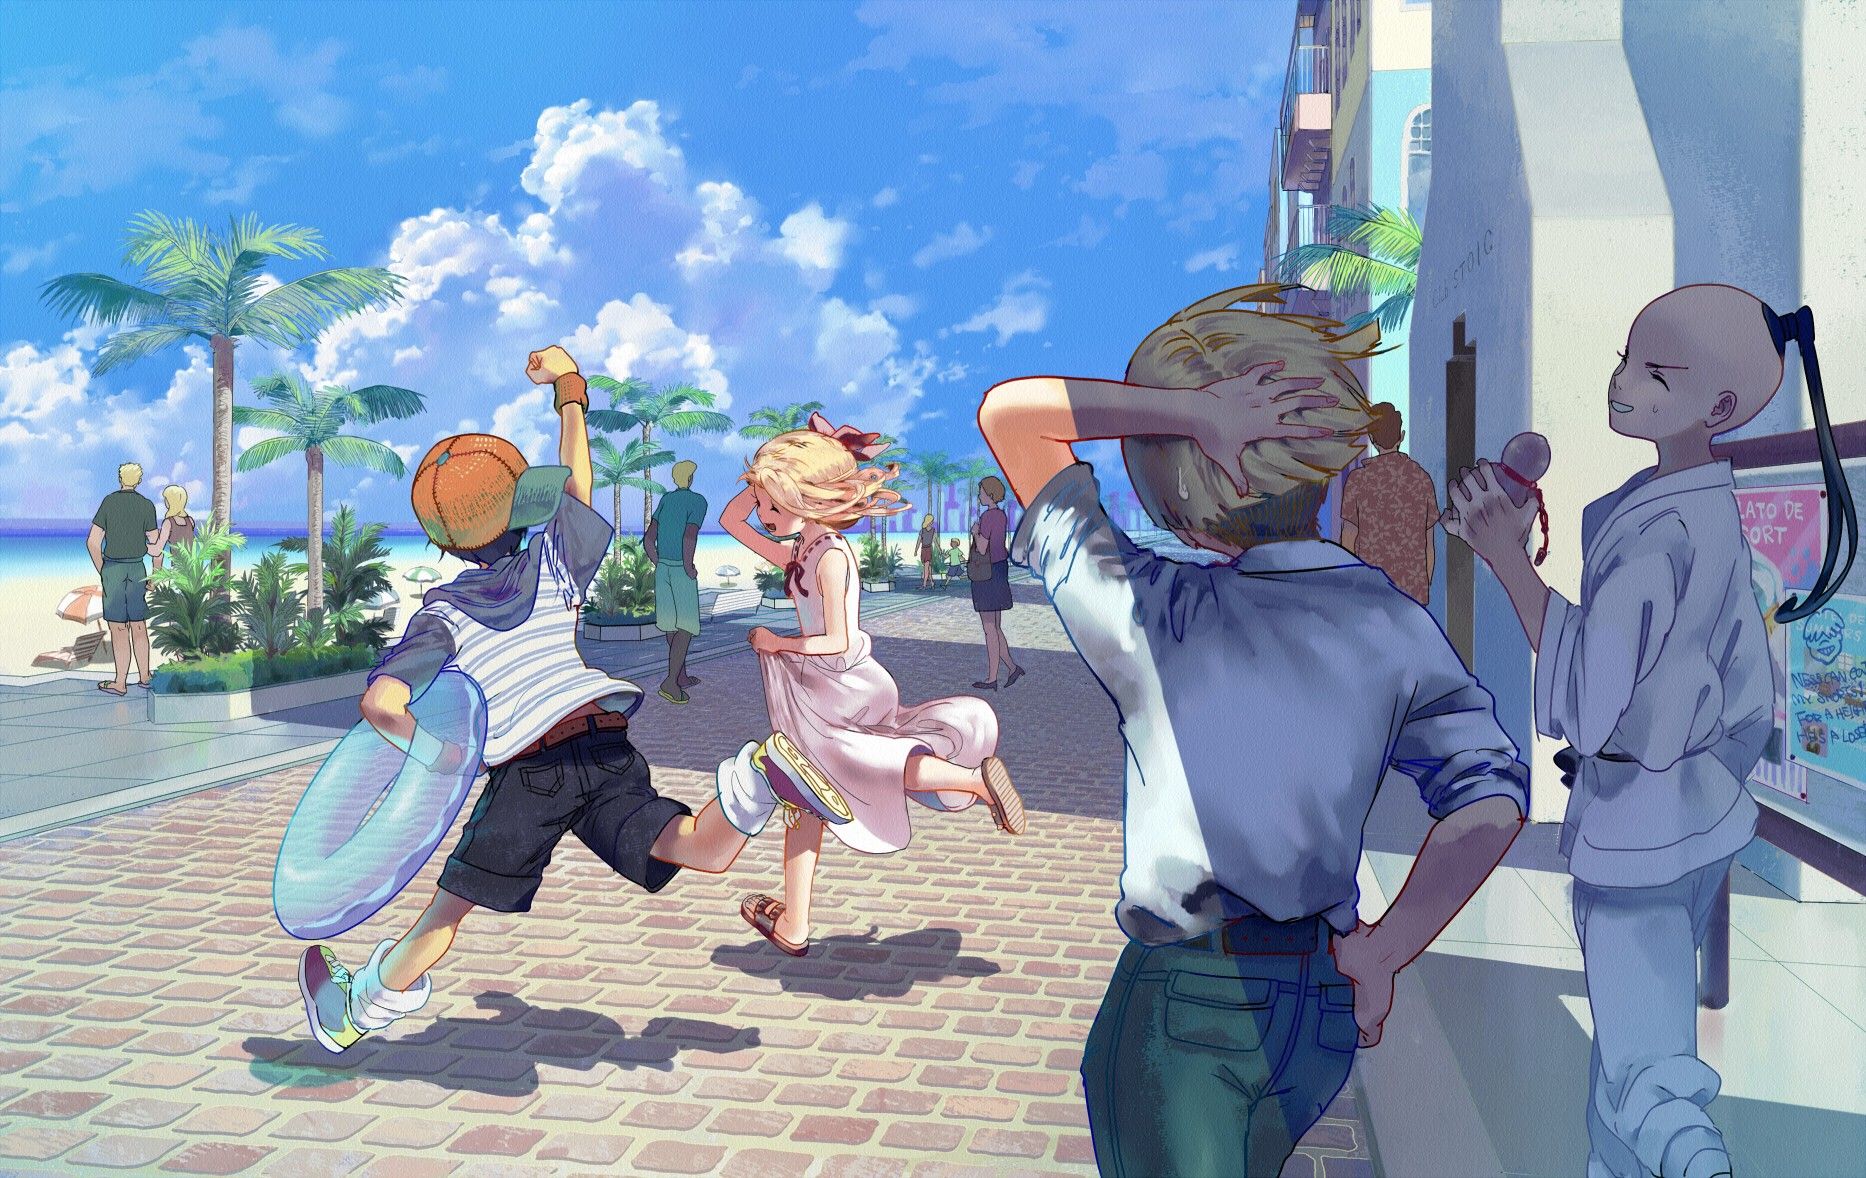 Wallpaper, landscape, people, anime, children, resort, playground, play, vacation, child, social group 1866x1178